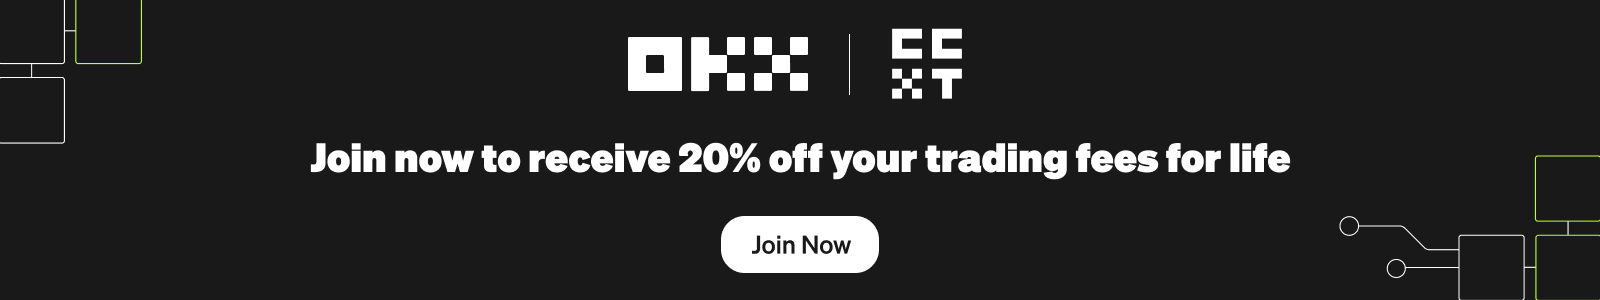 OKX + CCXT Exclusive Event: Trade And Earn